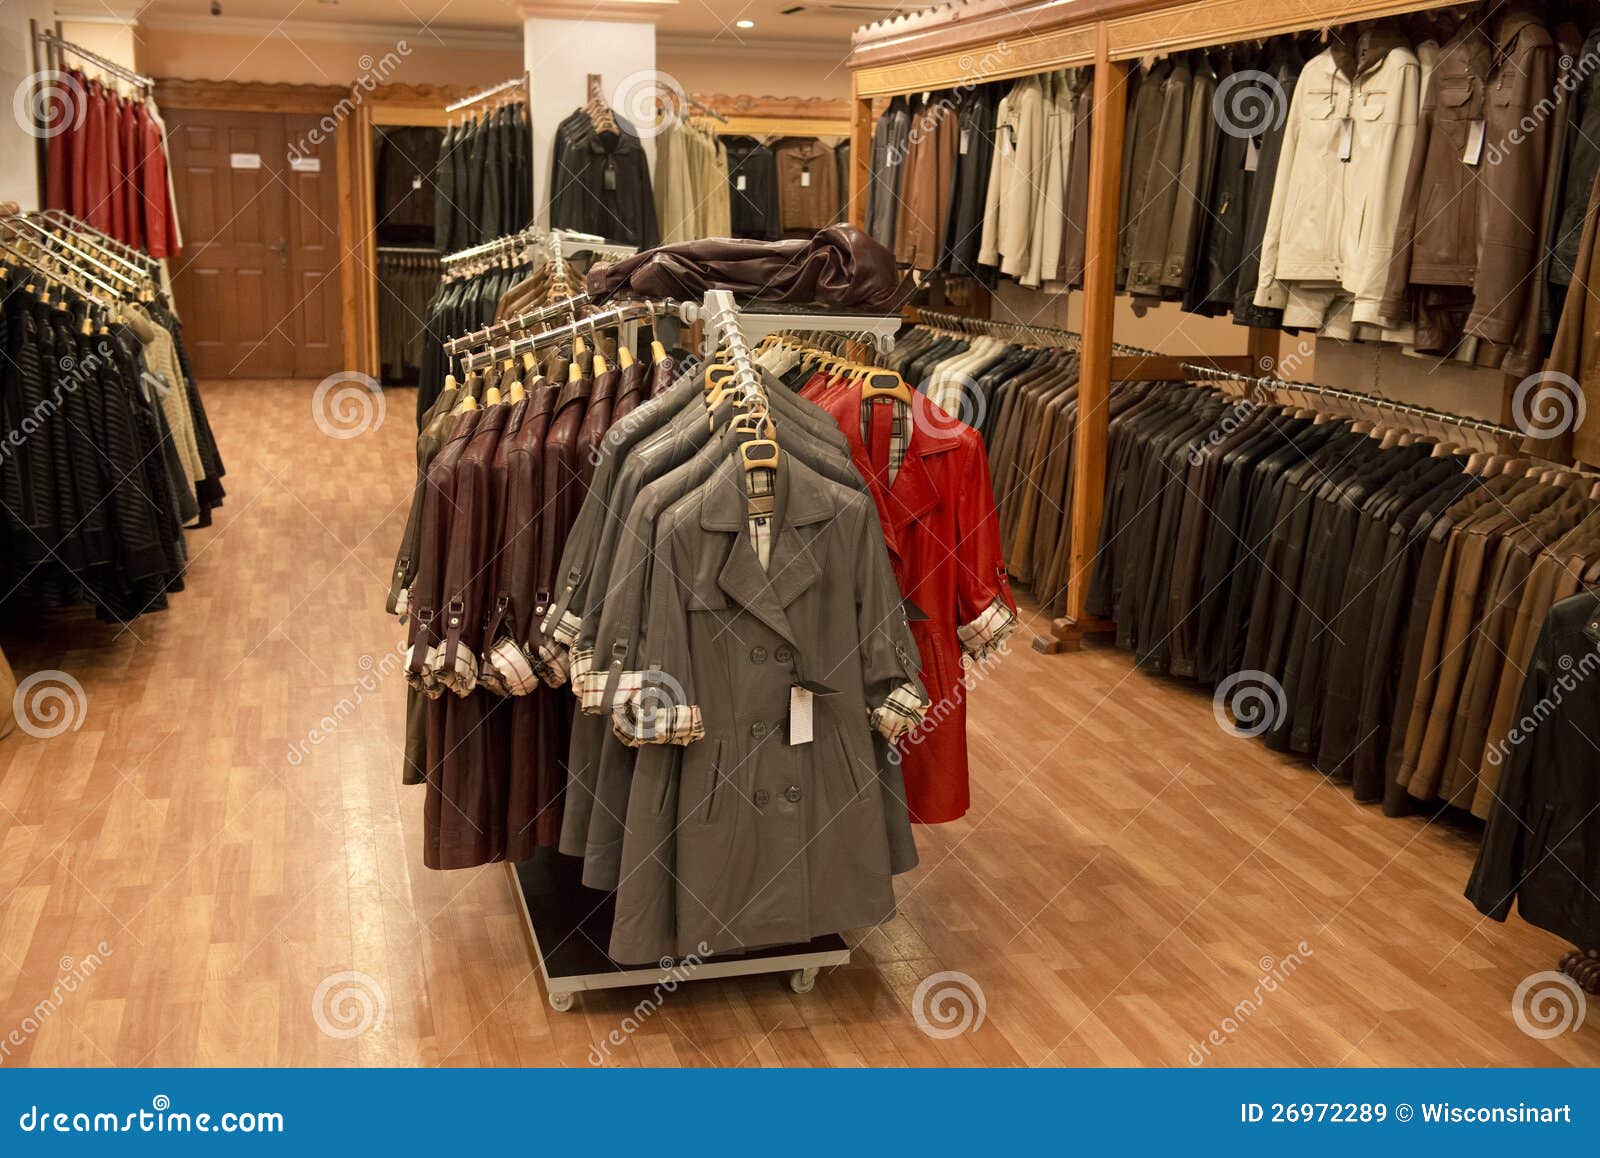 leather coats in a retail store shop